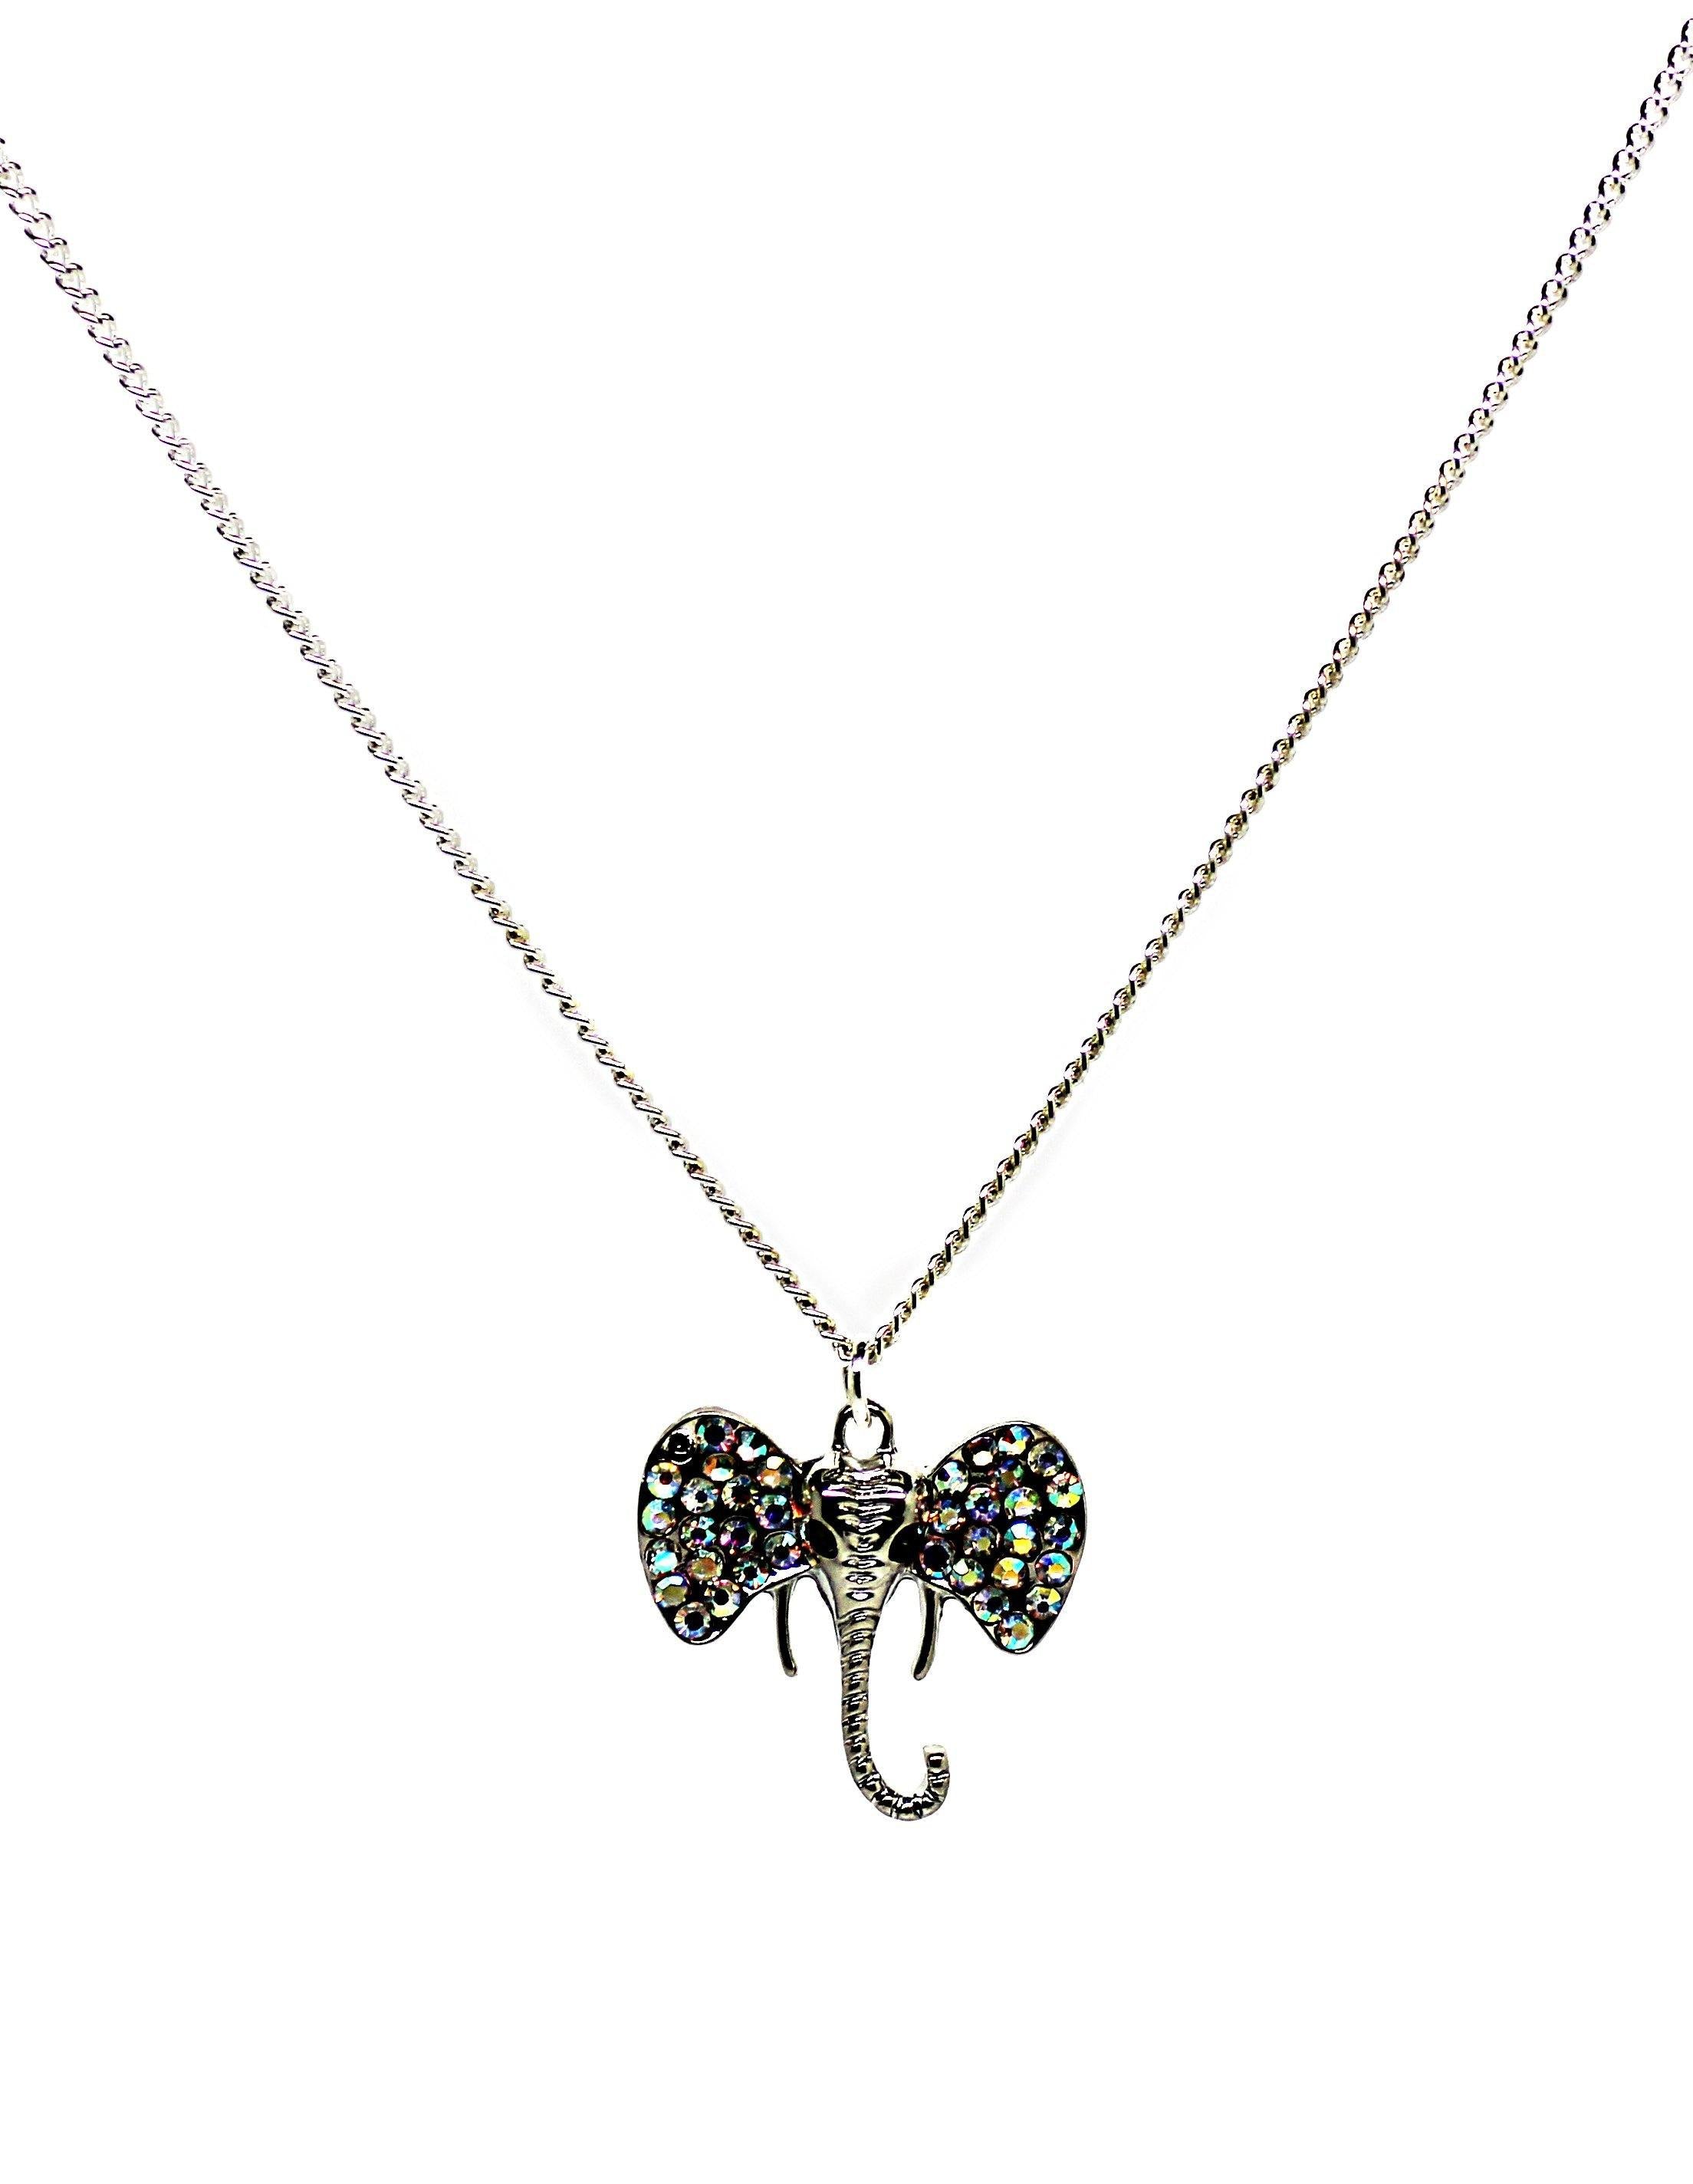 Elephant Head Necklace - Wildtouch - Wildtouch